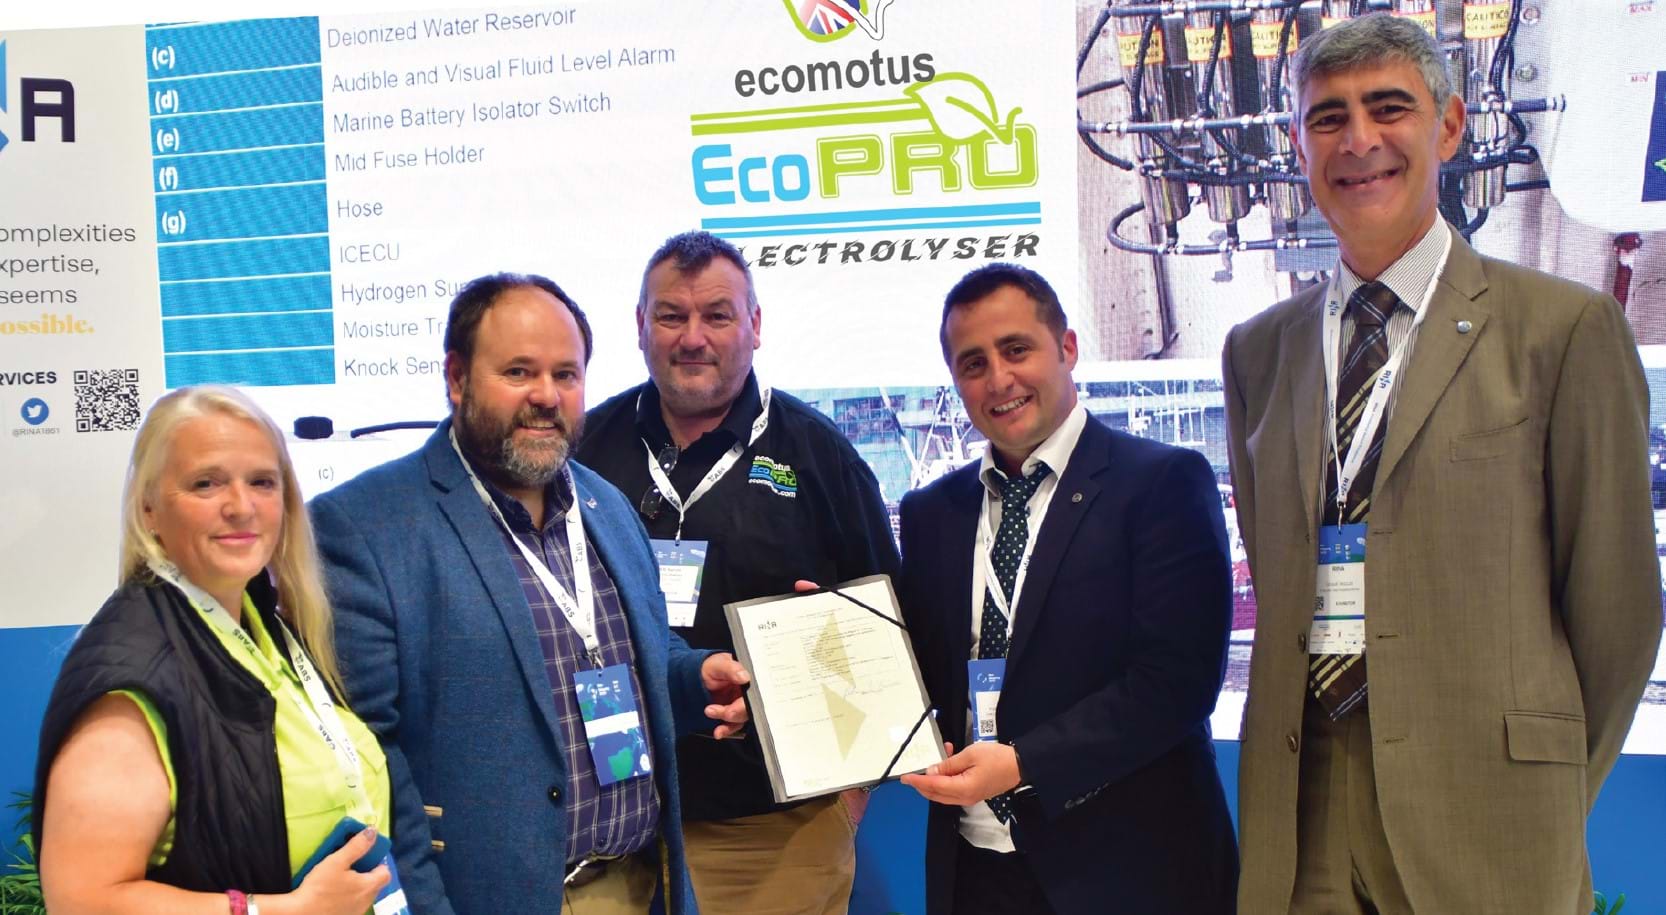 The Ecomotus team receiving a certificate acknowledging RINA Type approval.